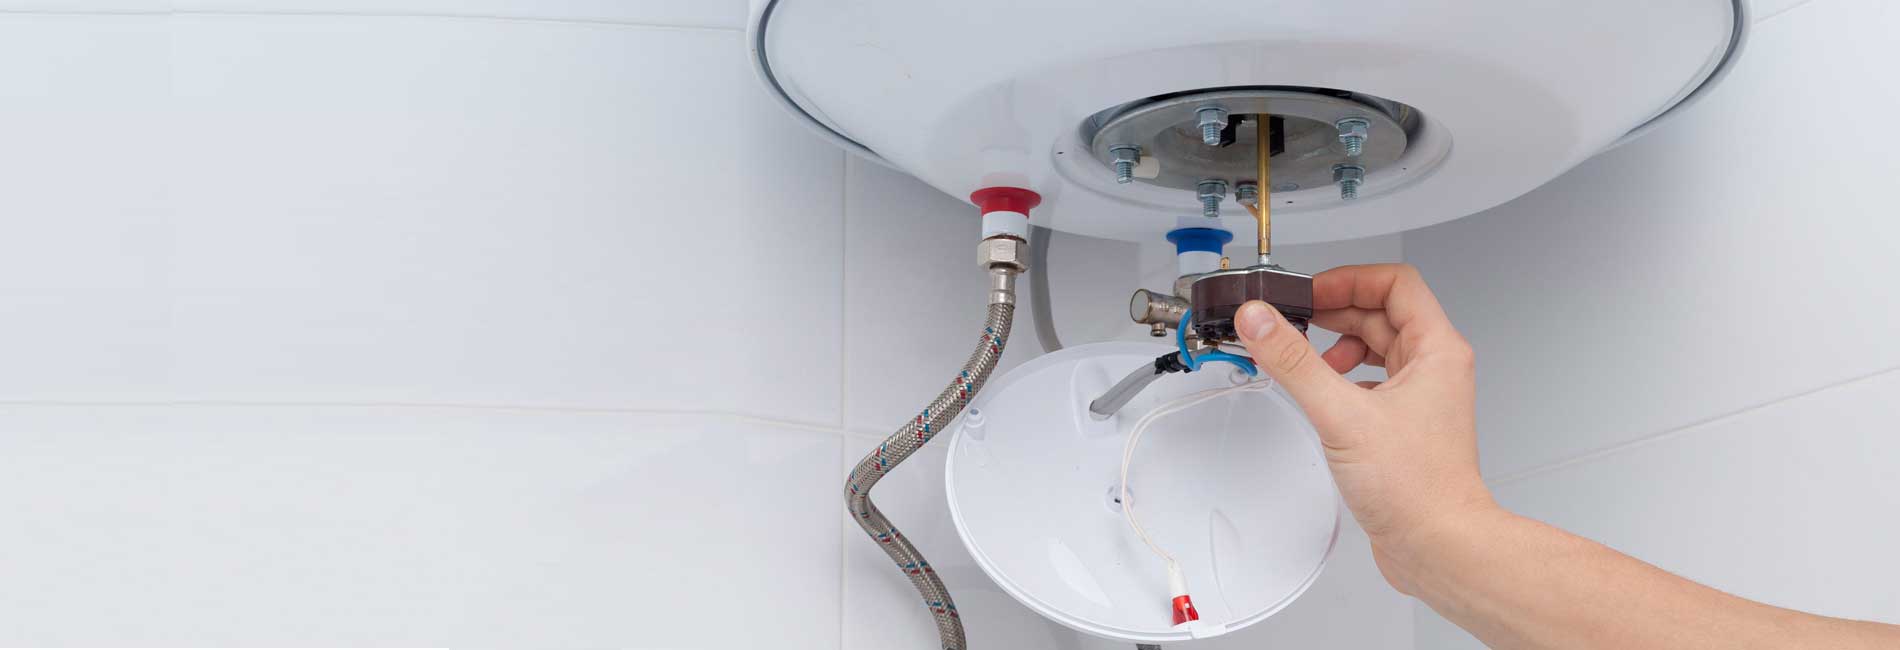 Water Heater Repair And Service In Chennai Water Heater Service